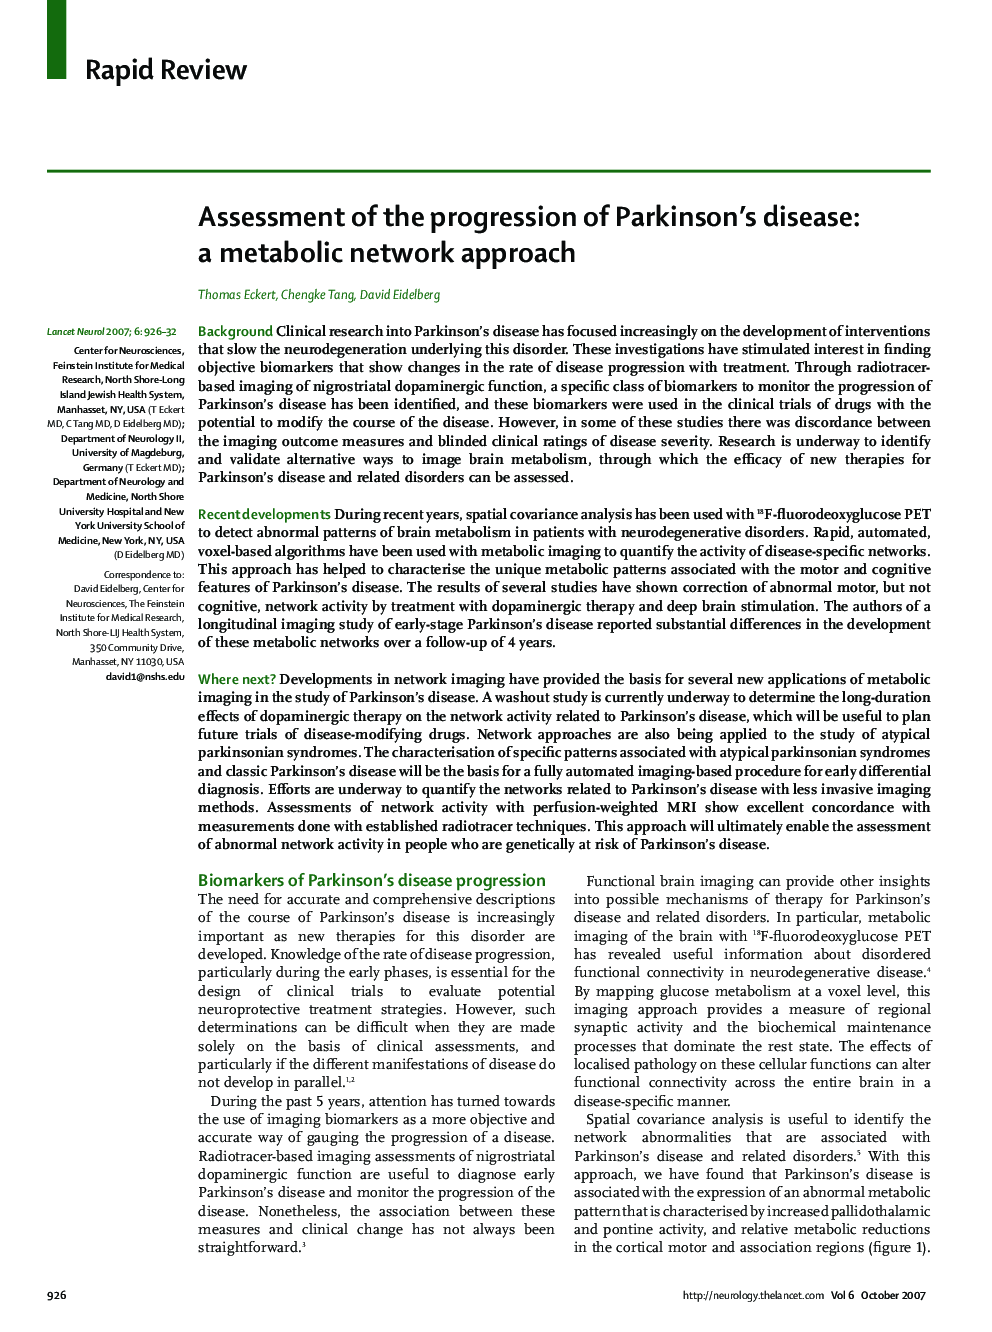 Assessment of the progression of Parkinson's disease: a metabolic network approach